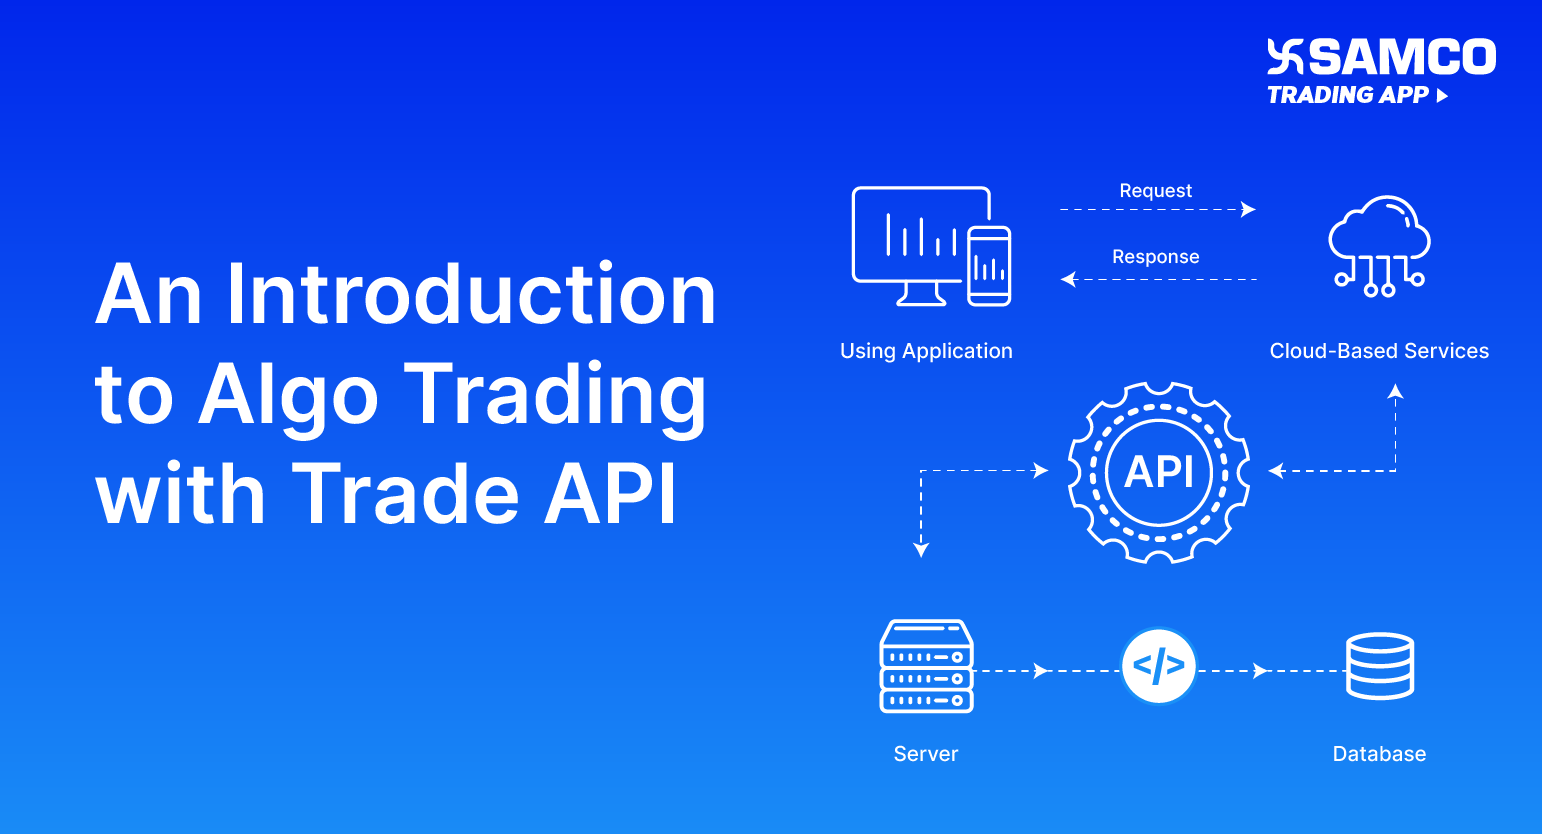 An Introduction to Algo Trading with Trade API